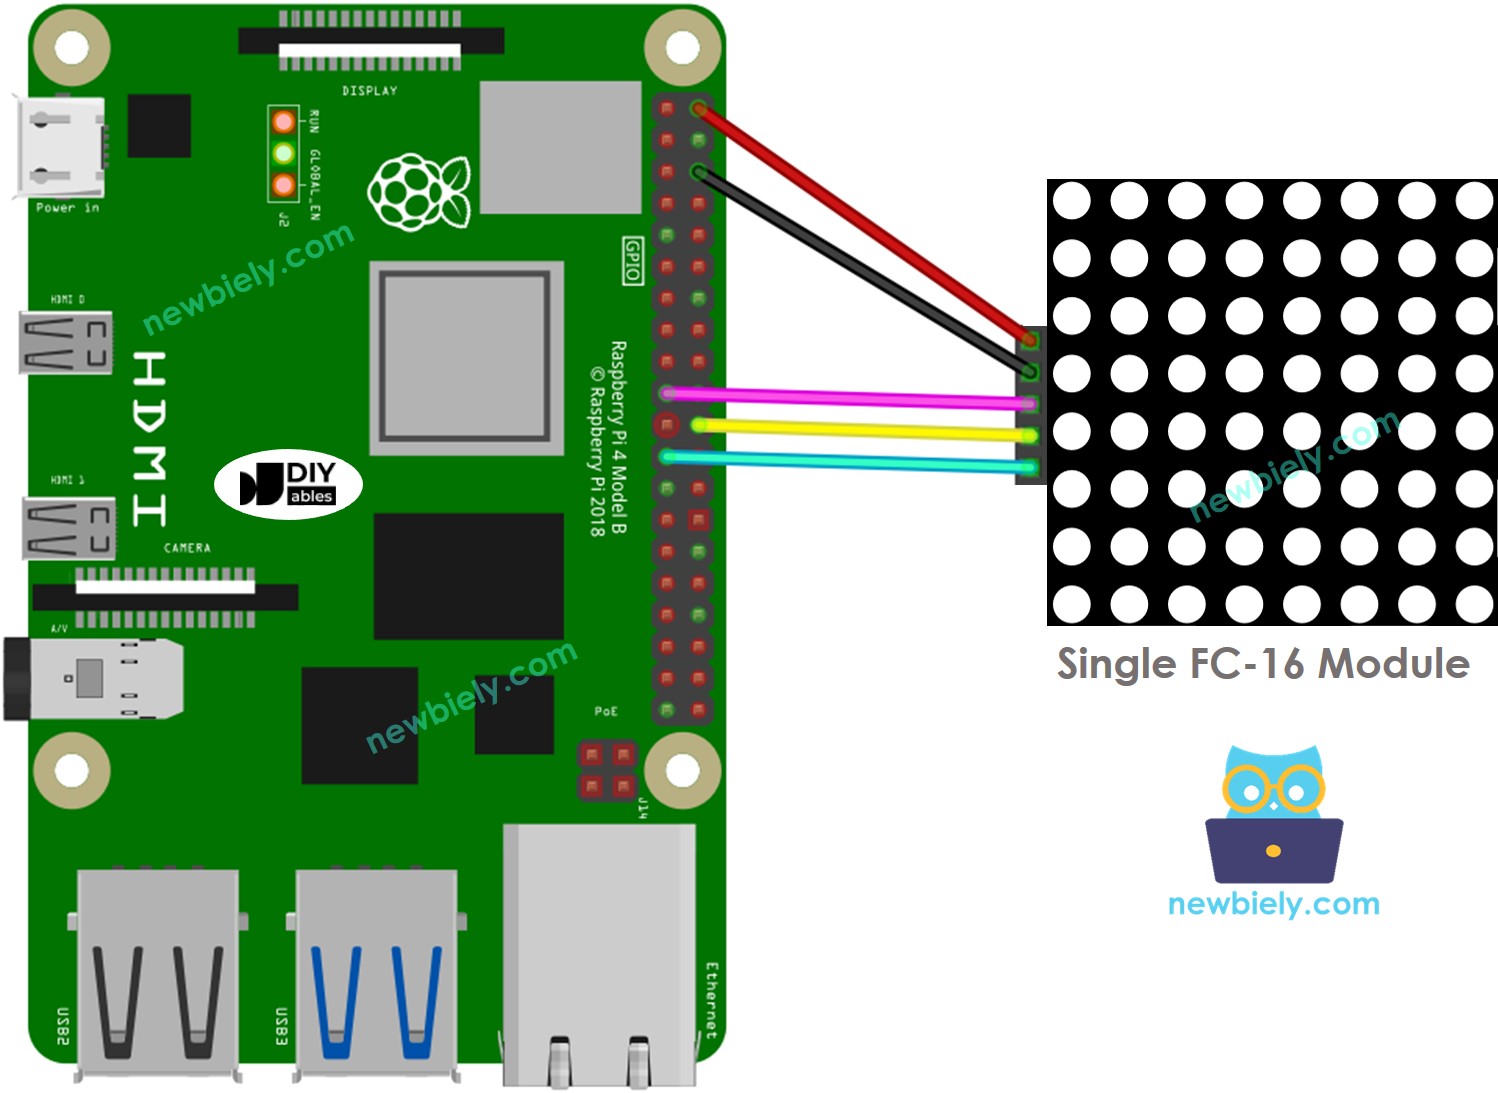 The wiring diagram between Raspberry Pi and 8x8 LED matrix FC-16